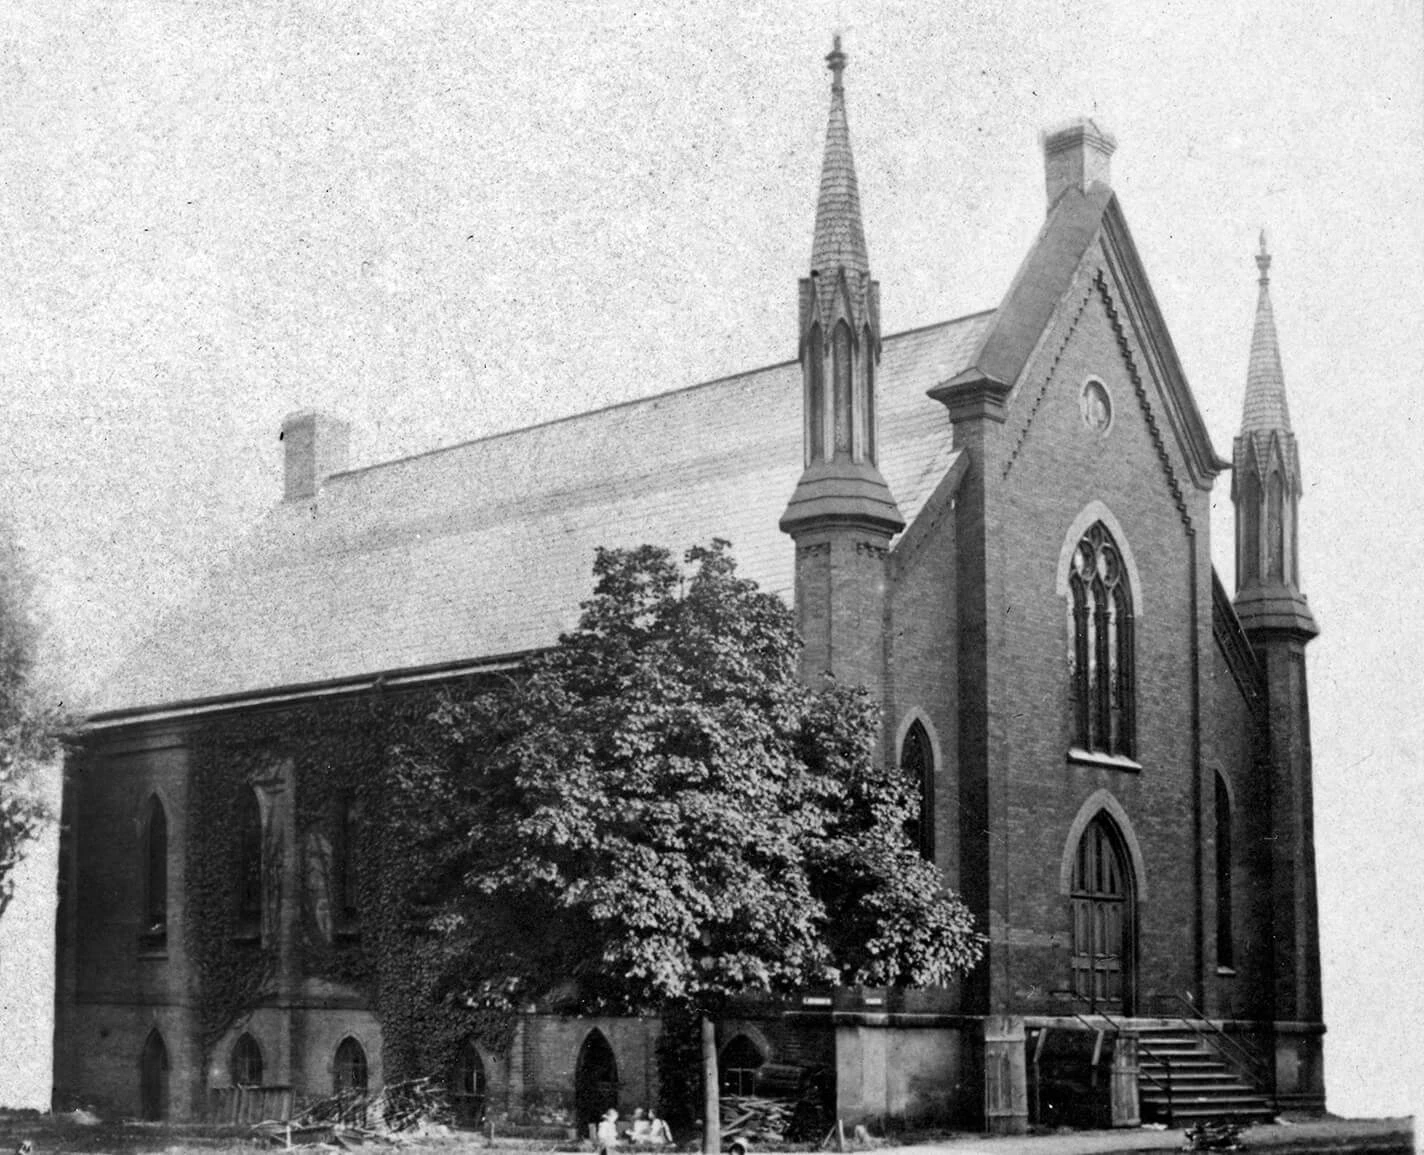 Black and white photo of a dark brick church with two steeples.